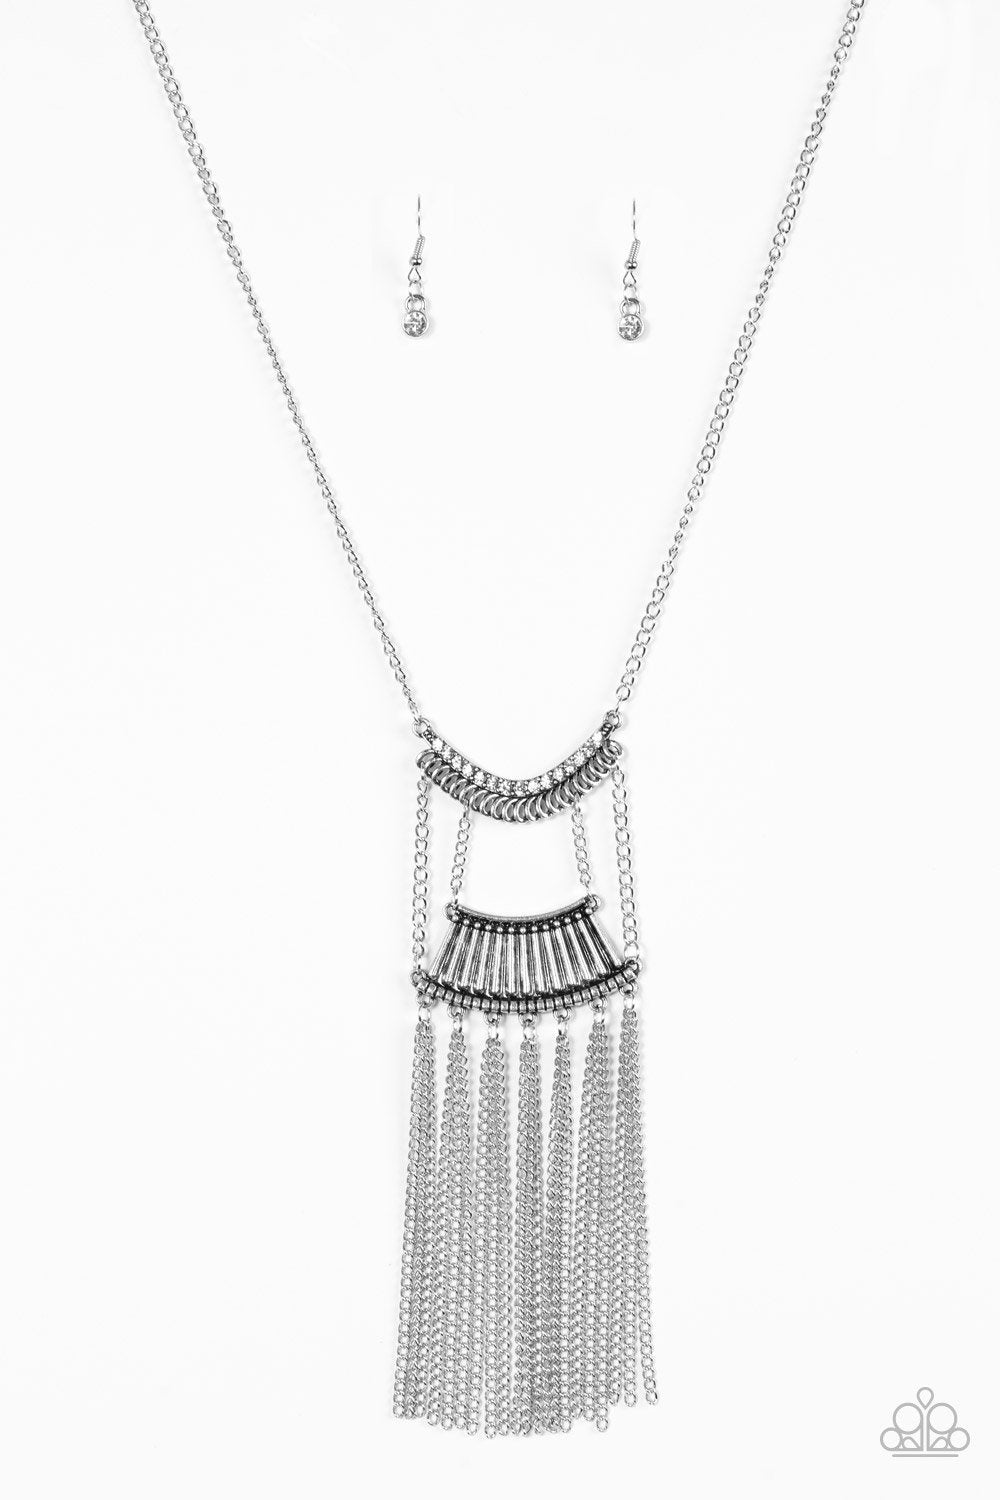 Glam Goddess Long Silver and White Necklace - Paparazzi Accessories-CarasShop.com - $5 Jewelry by Cara Jewels